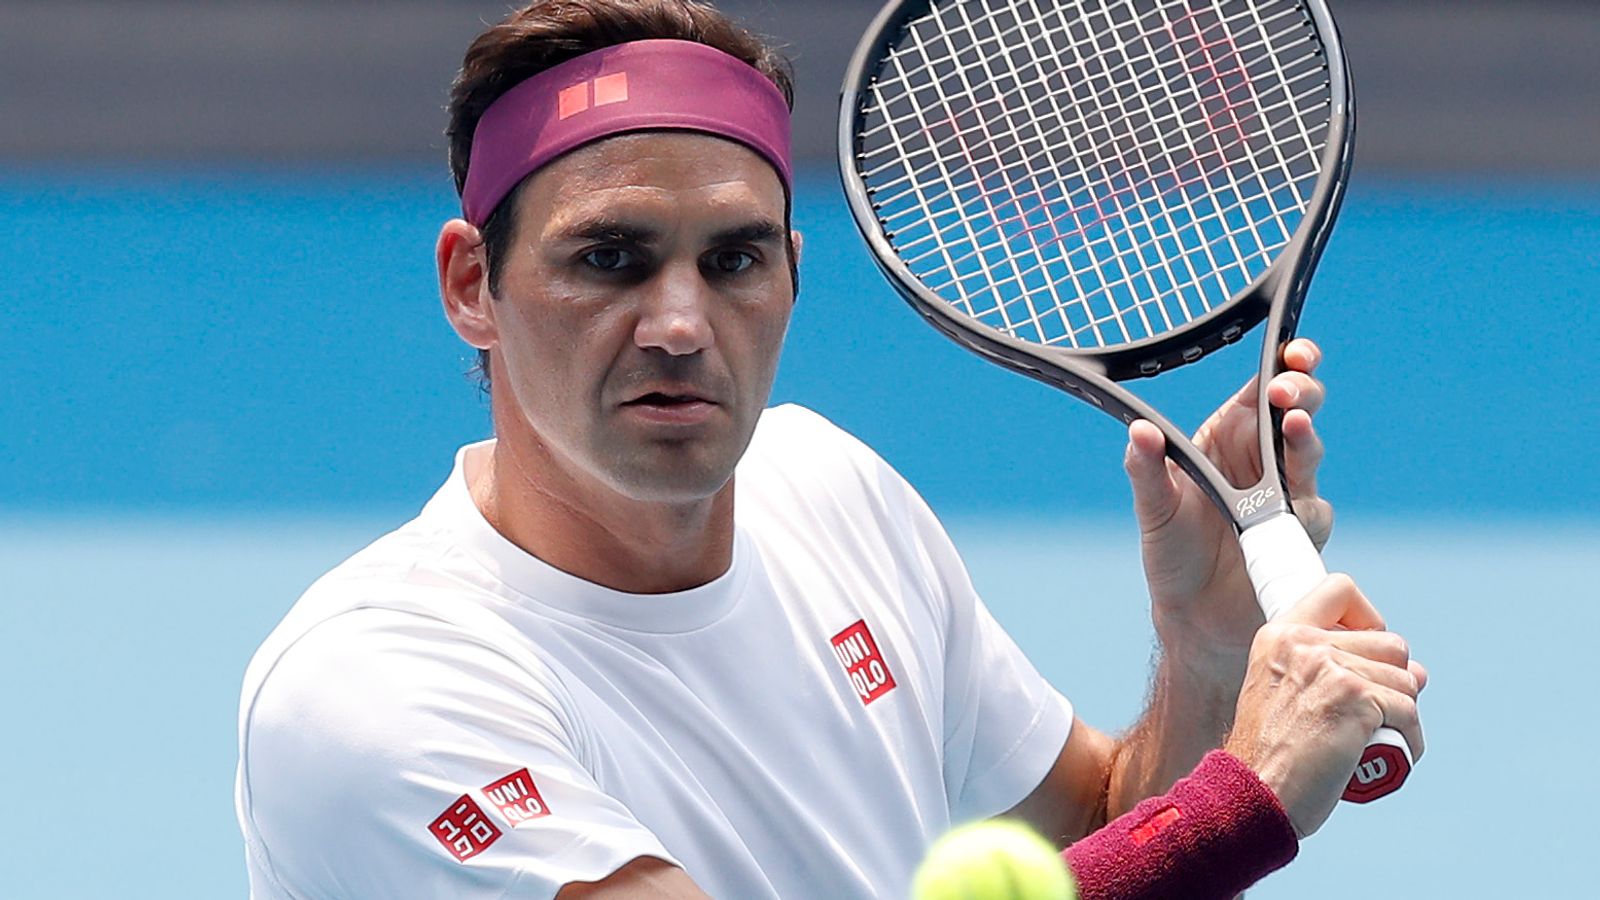 Roger Federer says he is fit and raring to go ahead of the Australian